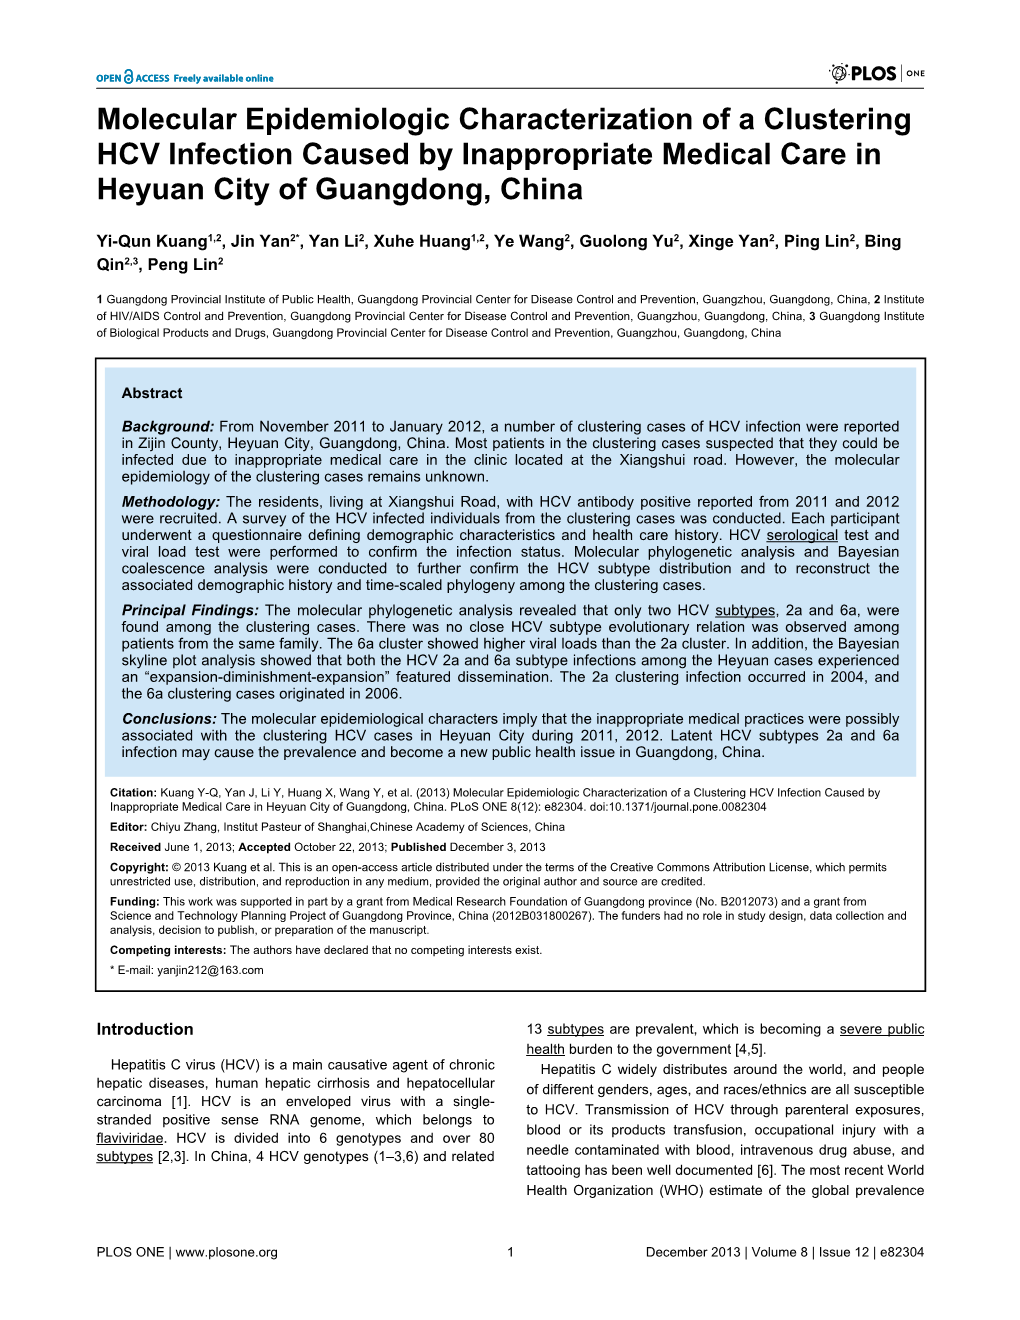 Molecular Epidemiologic Characterization of a Clustering HCV Infection Caused by Inappropriate Medical Care in Heyuan City of Guangdong, China